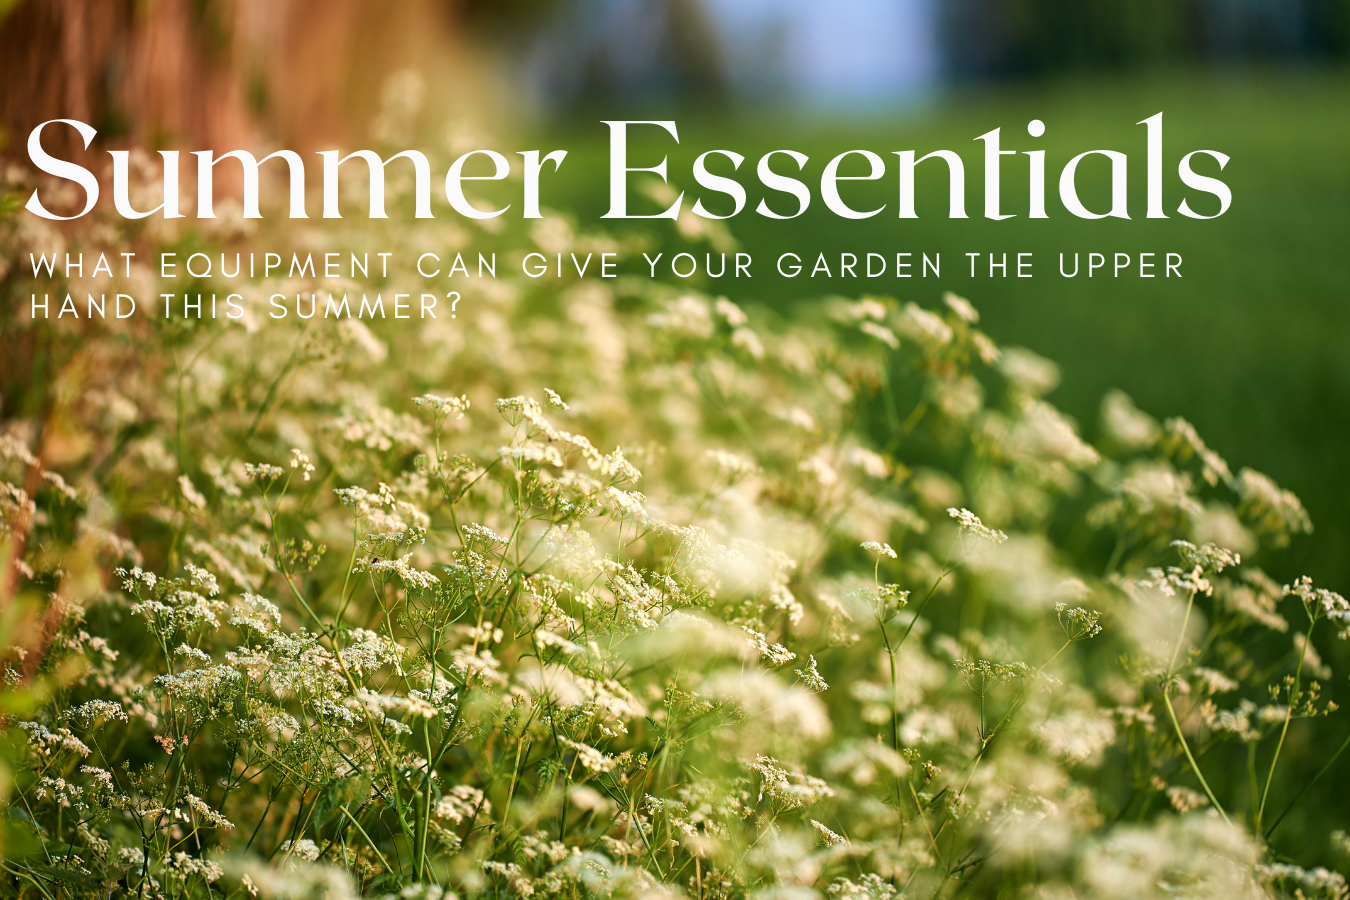 Summer Essentials: What equipment can give your garden the upper hand this summer?